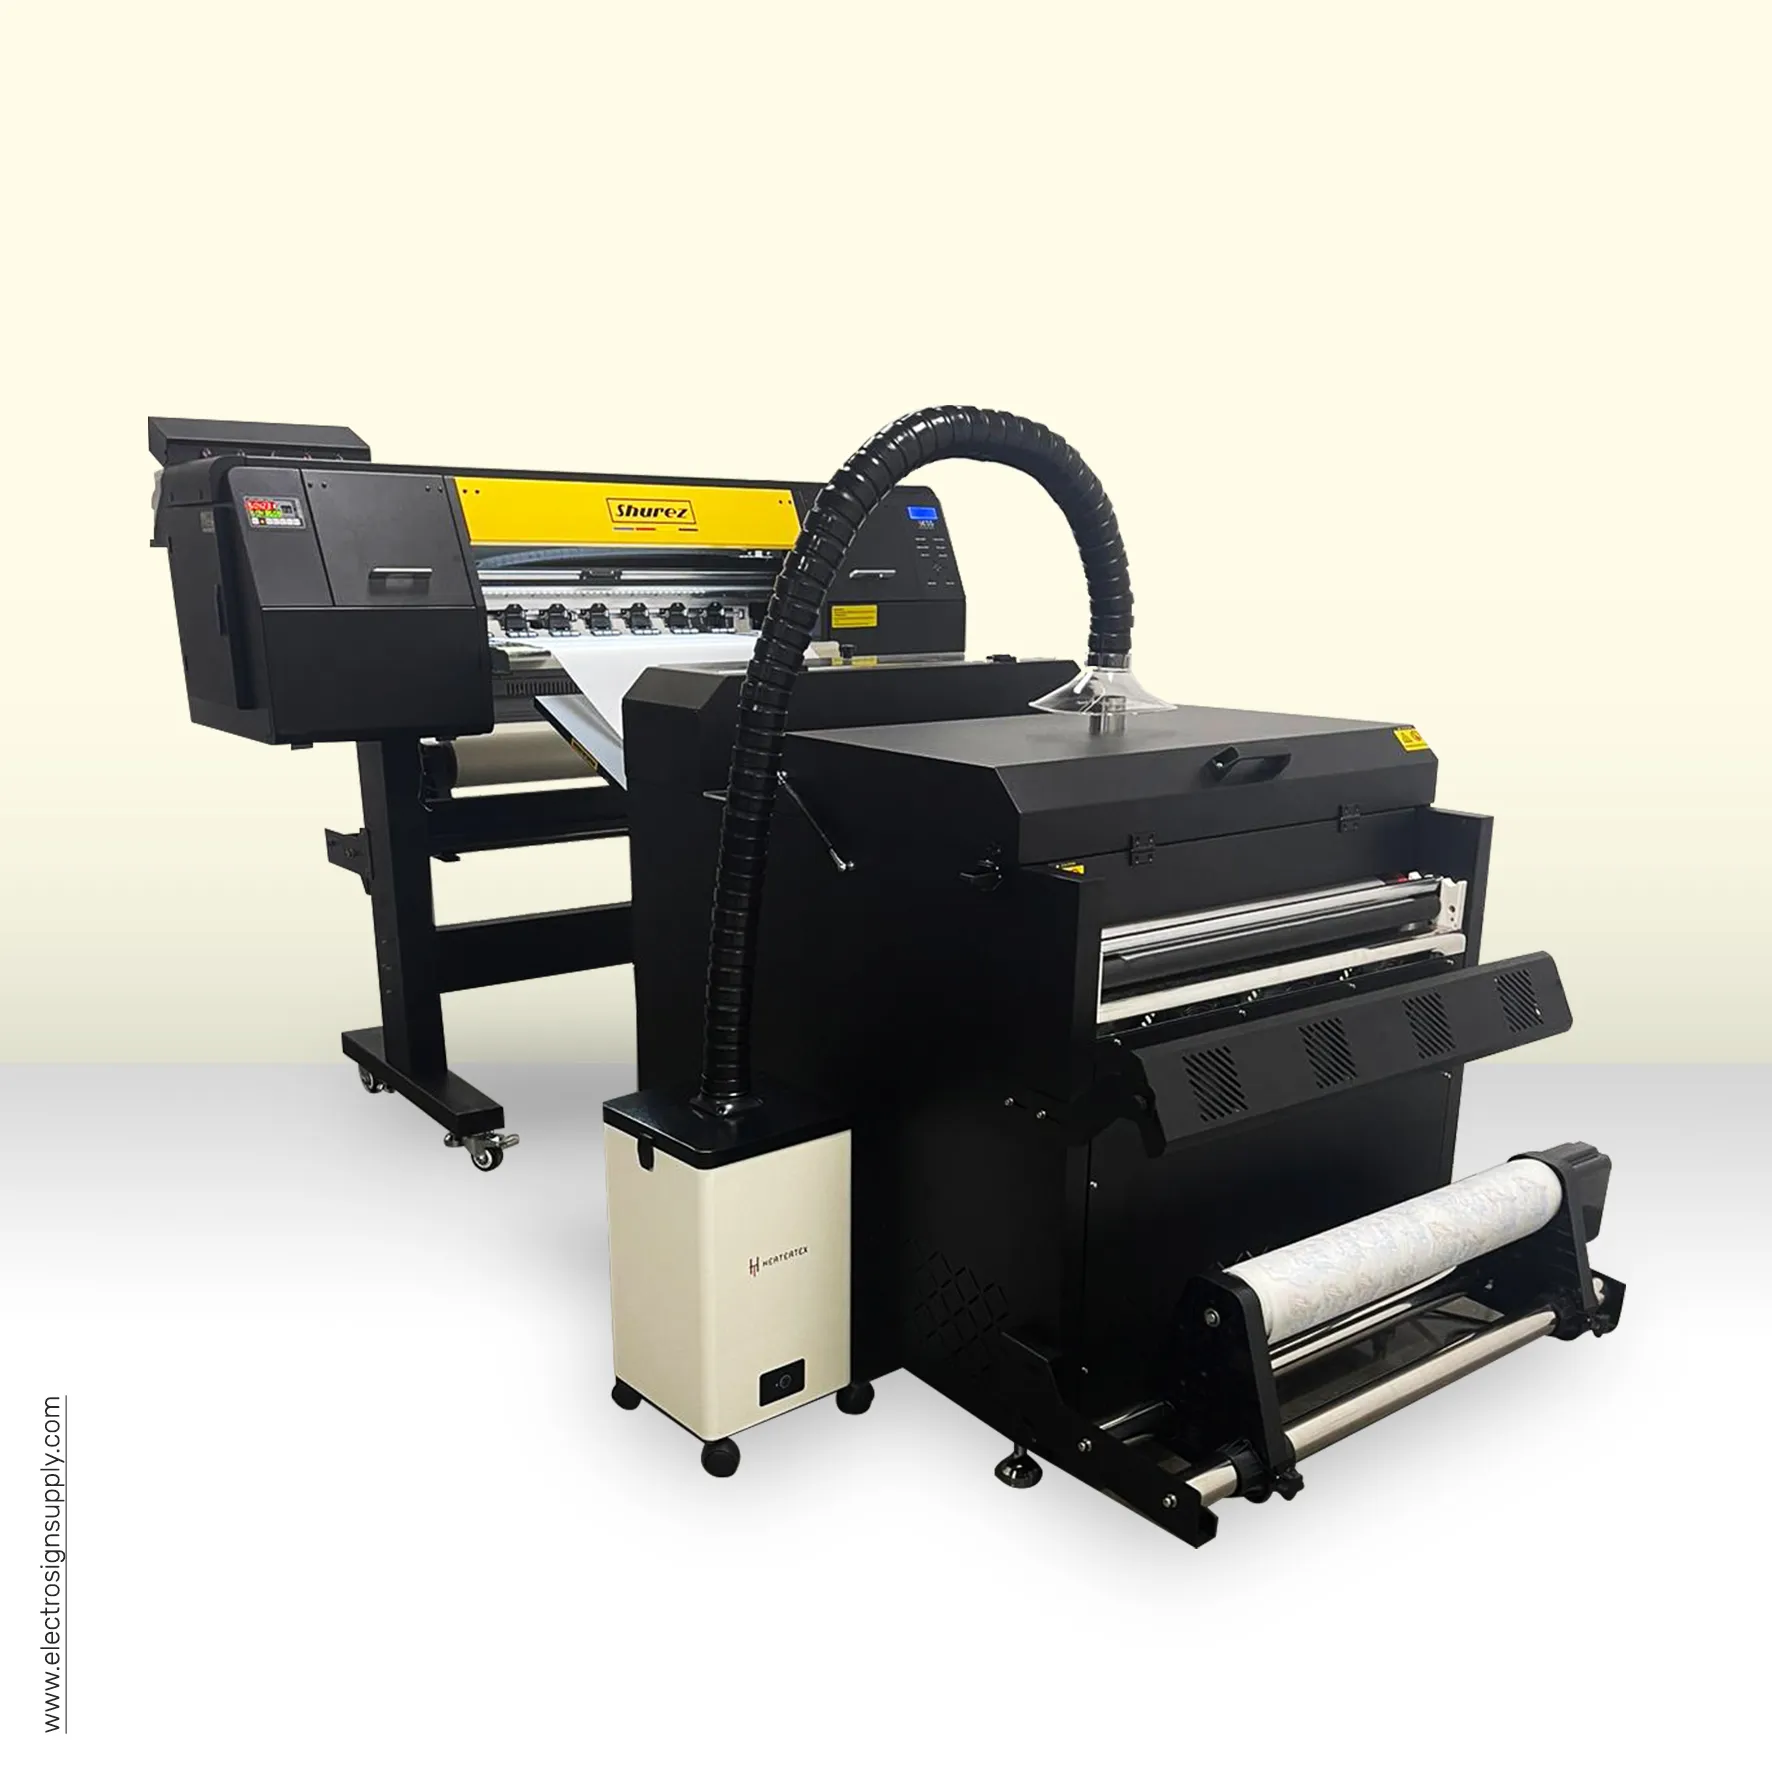 APS 24 DTF Printer Kit - Graphic Resource Systems LLC